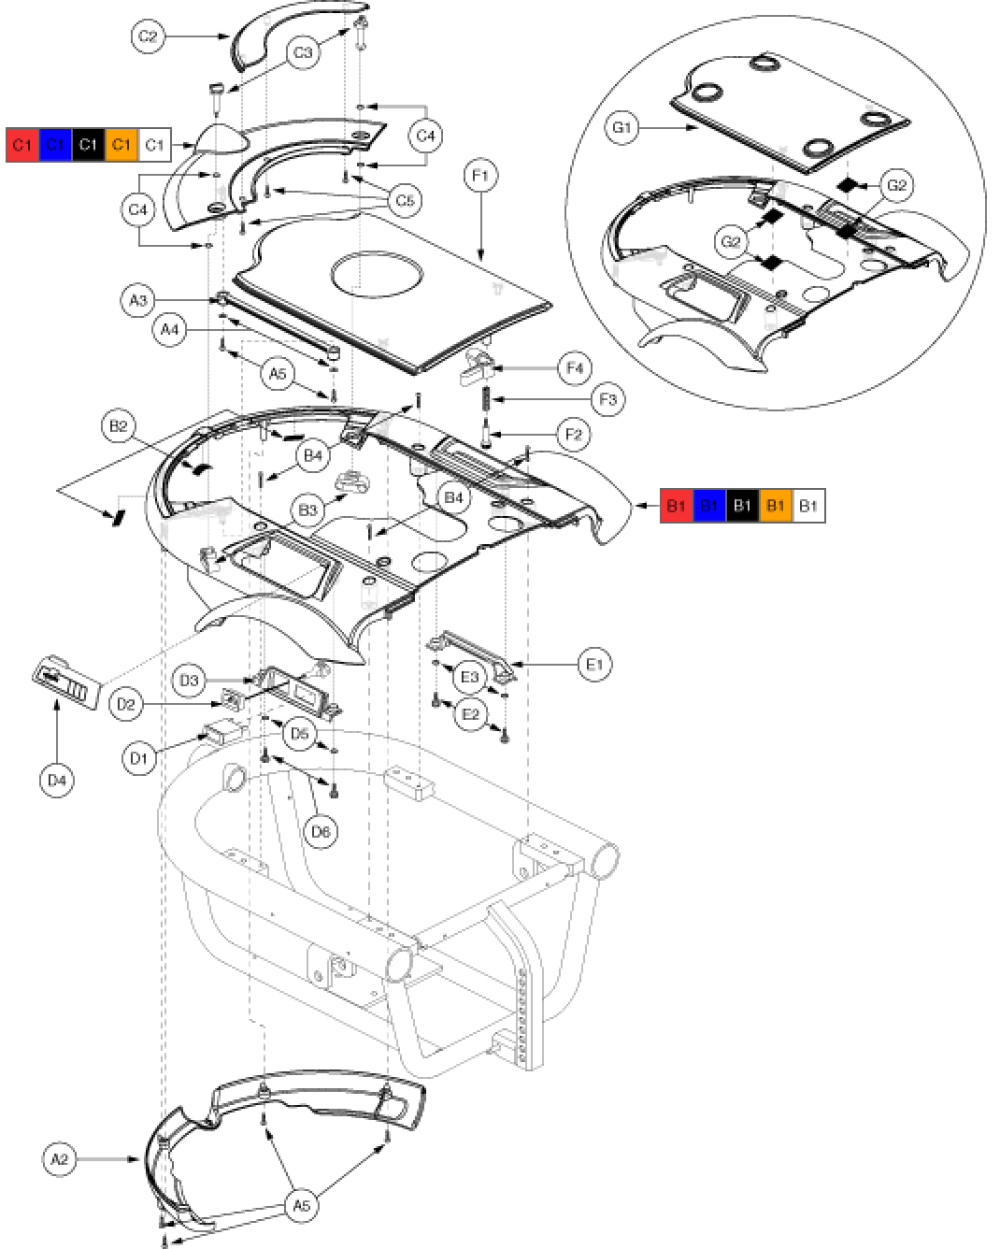 Shroud Assembly - Onboard Charger parts diagram